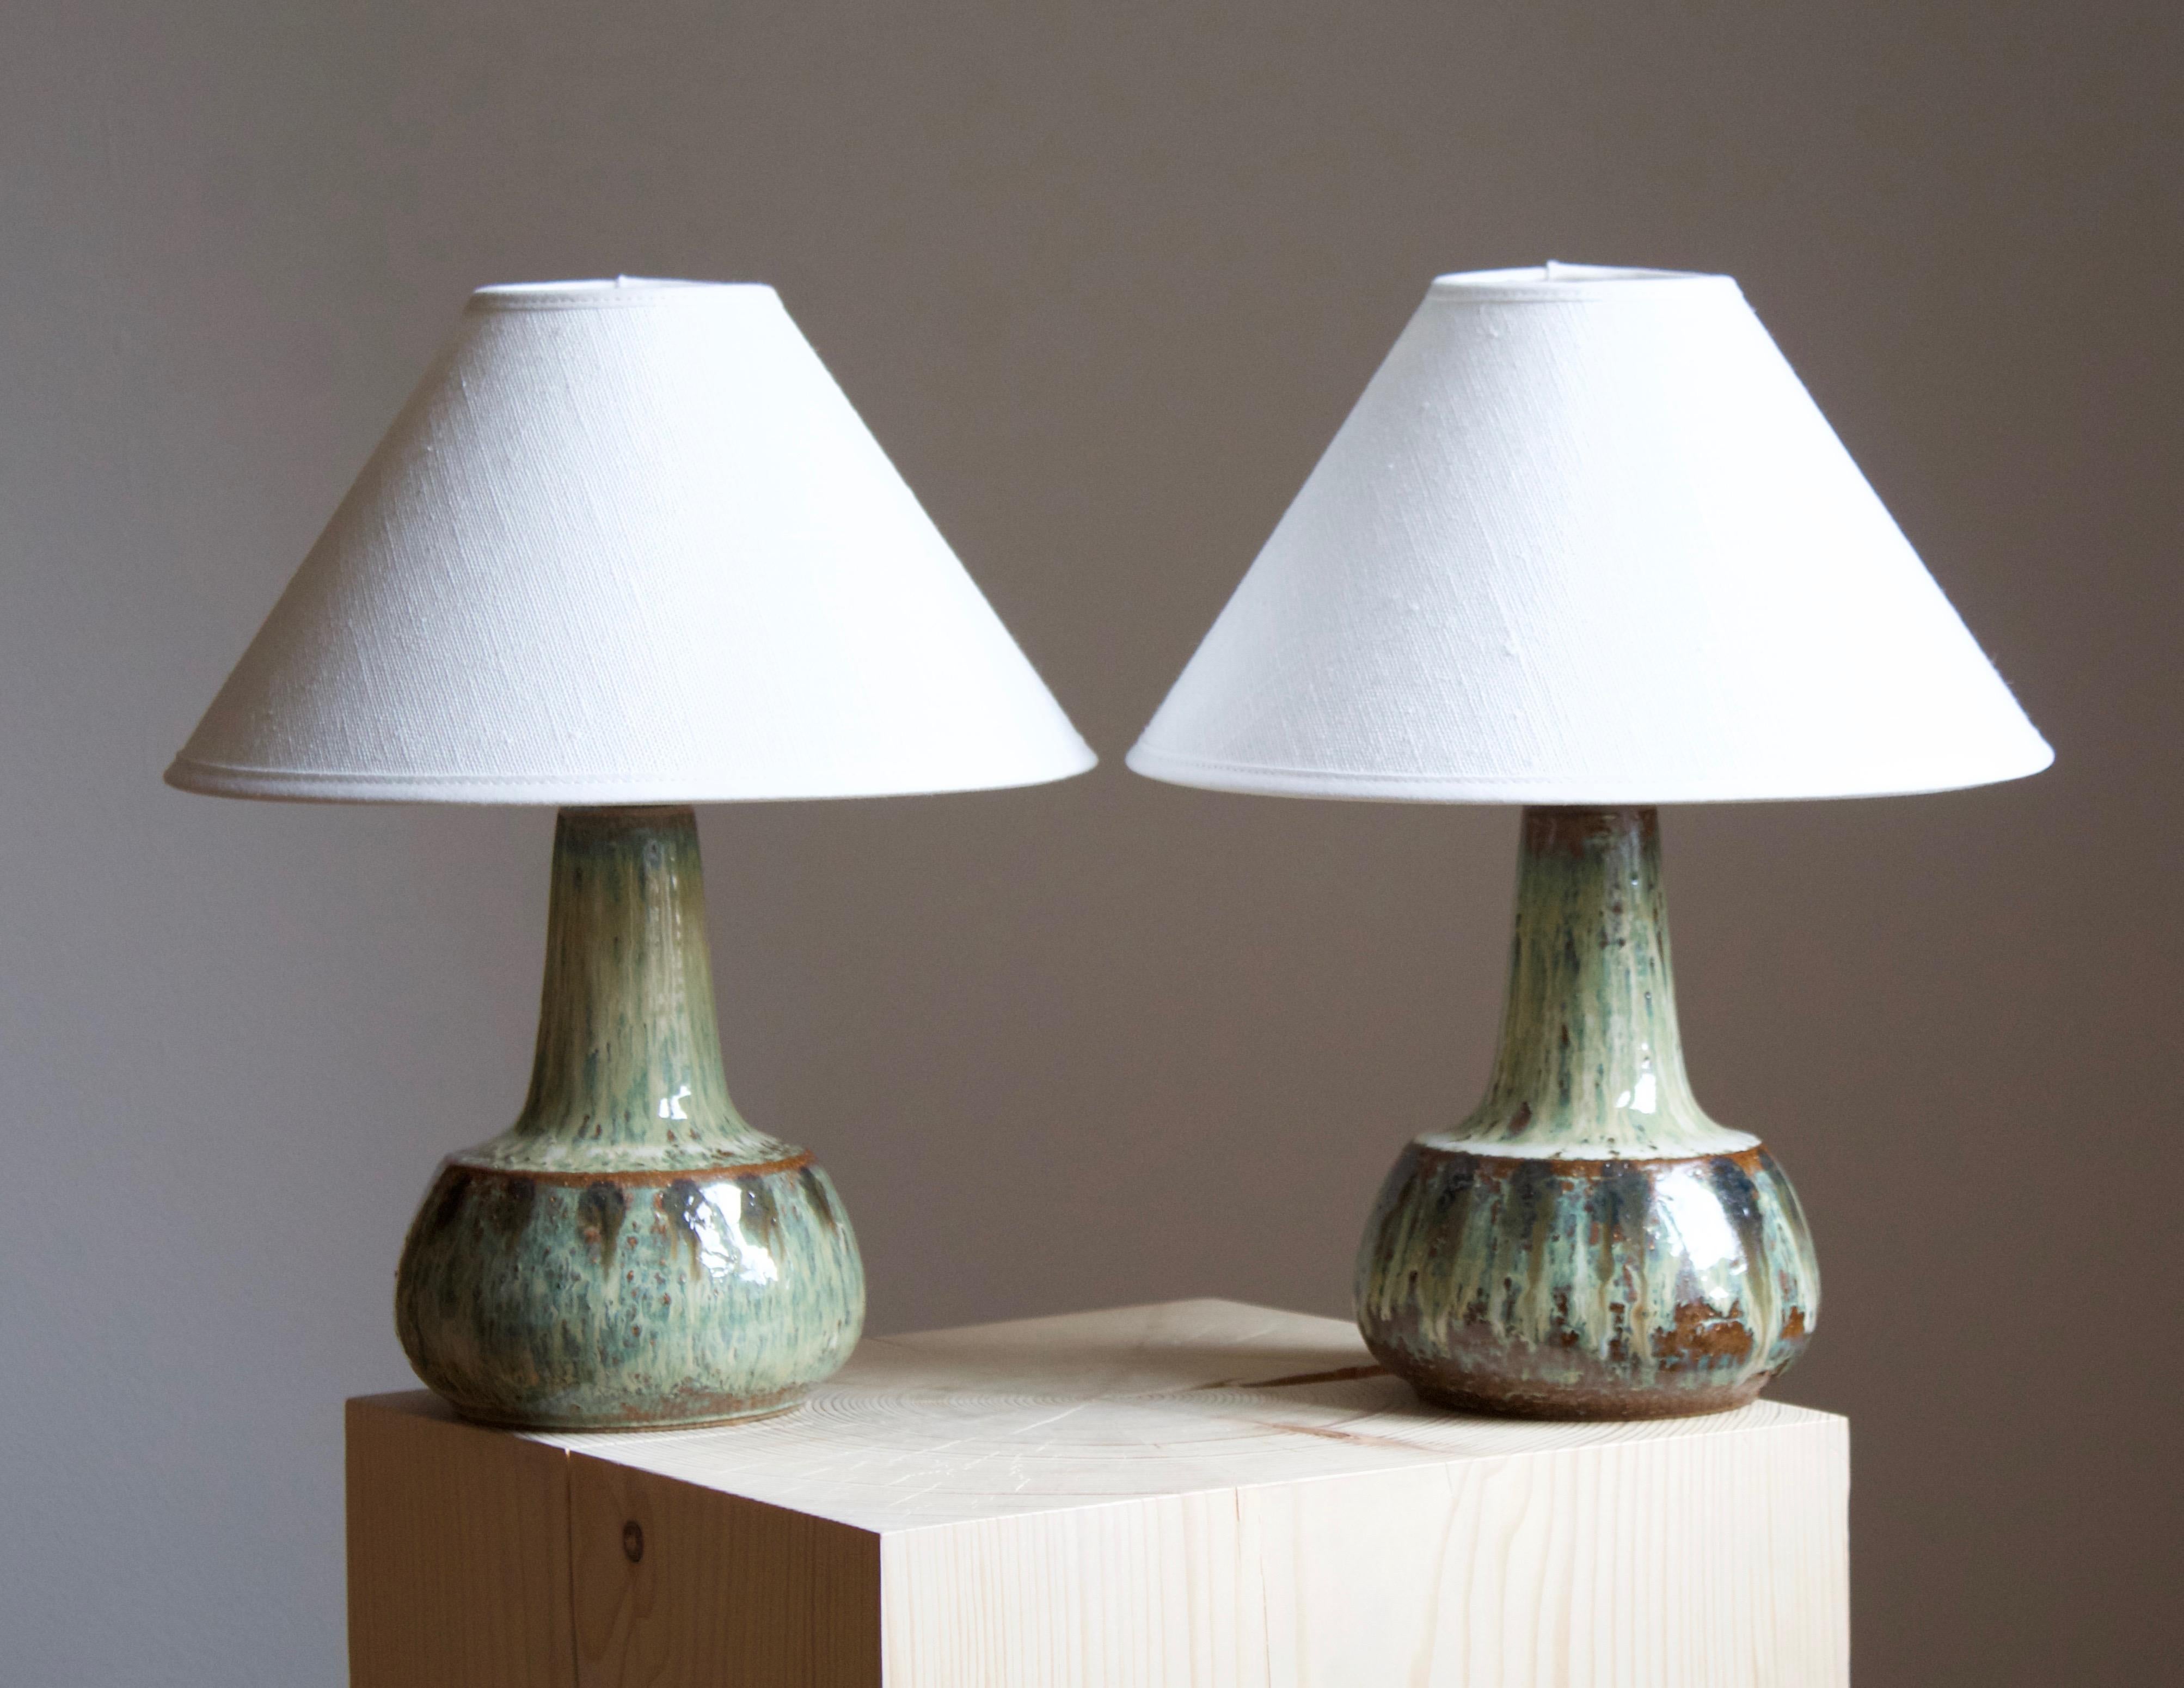 A pair of table lamps produced by Søholm Keramik, located on the island of Bornholm in Denmark. Features a highly artistic glazed and incised decor. 

Sold without lampshade. Stated dimensions exclude the lampshade. Height includes